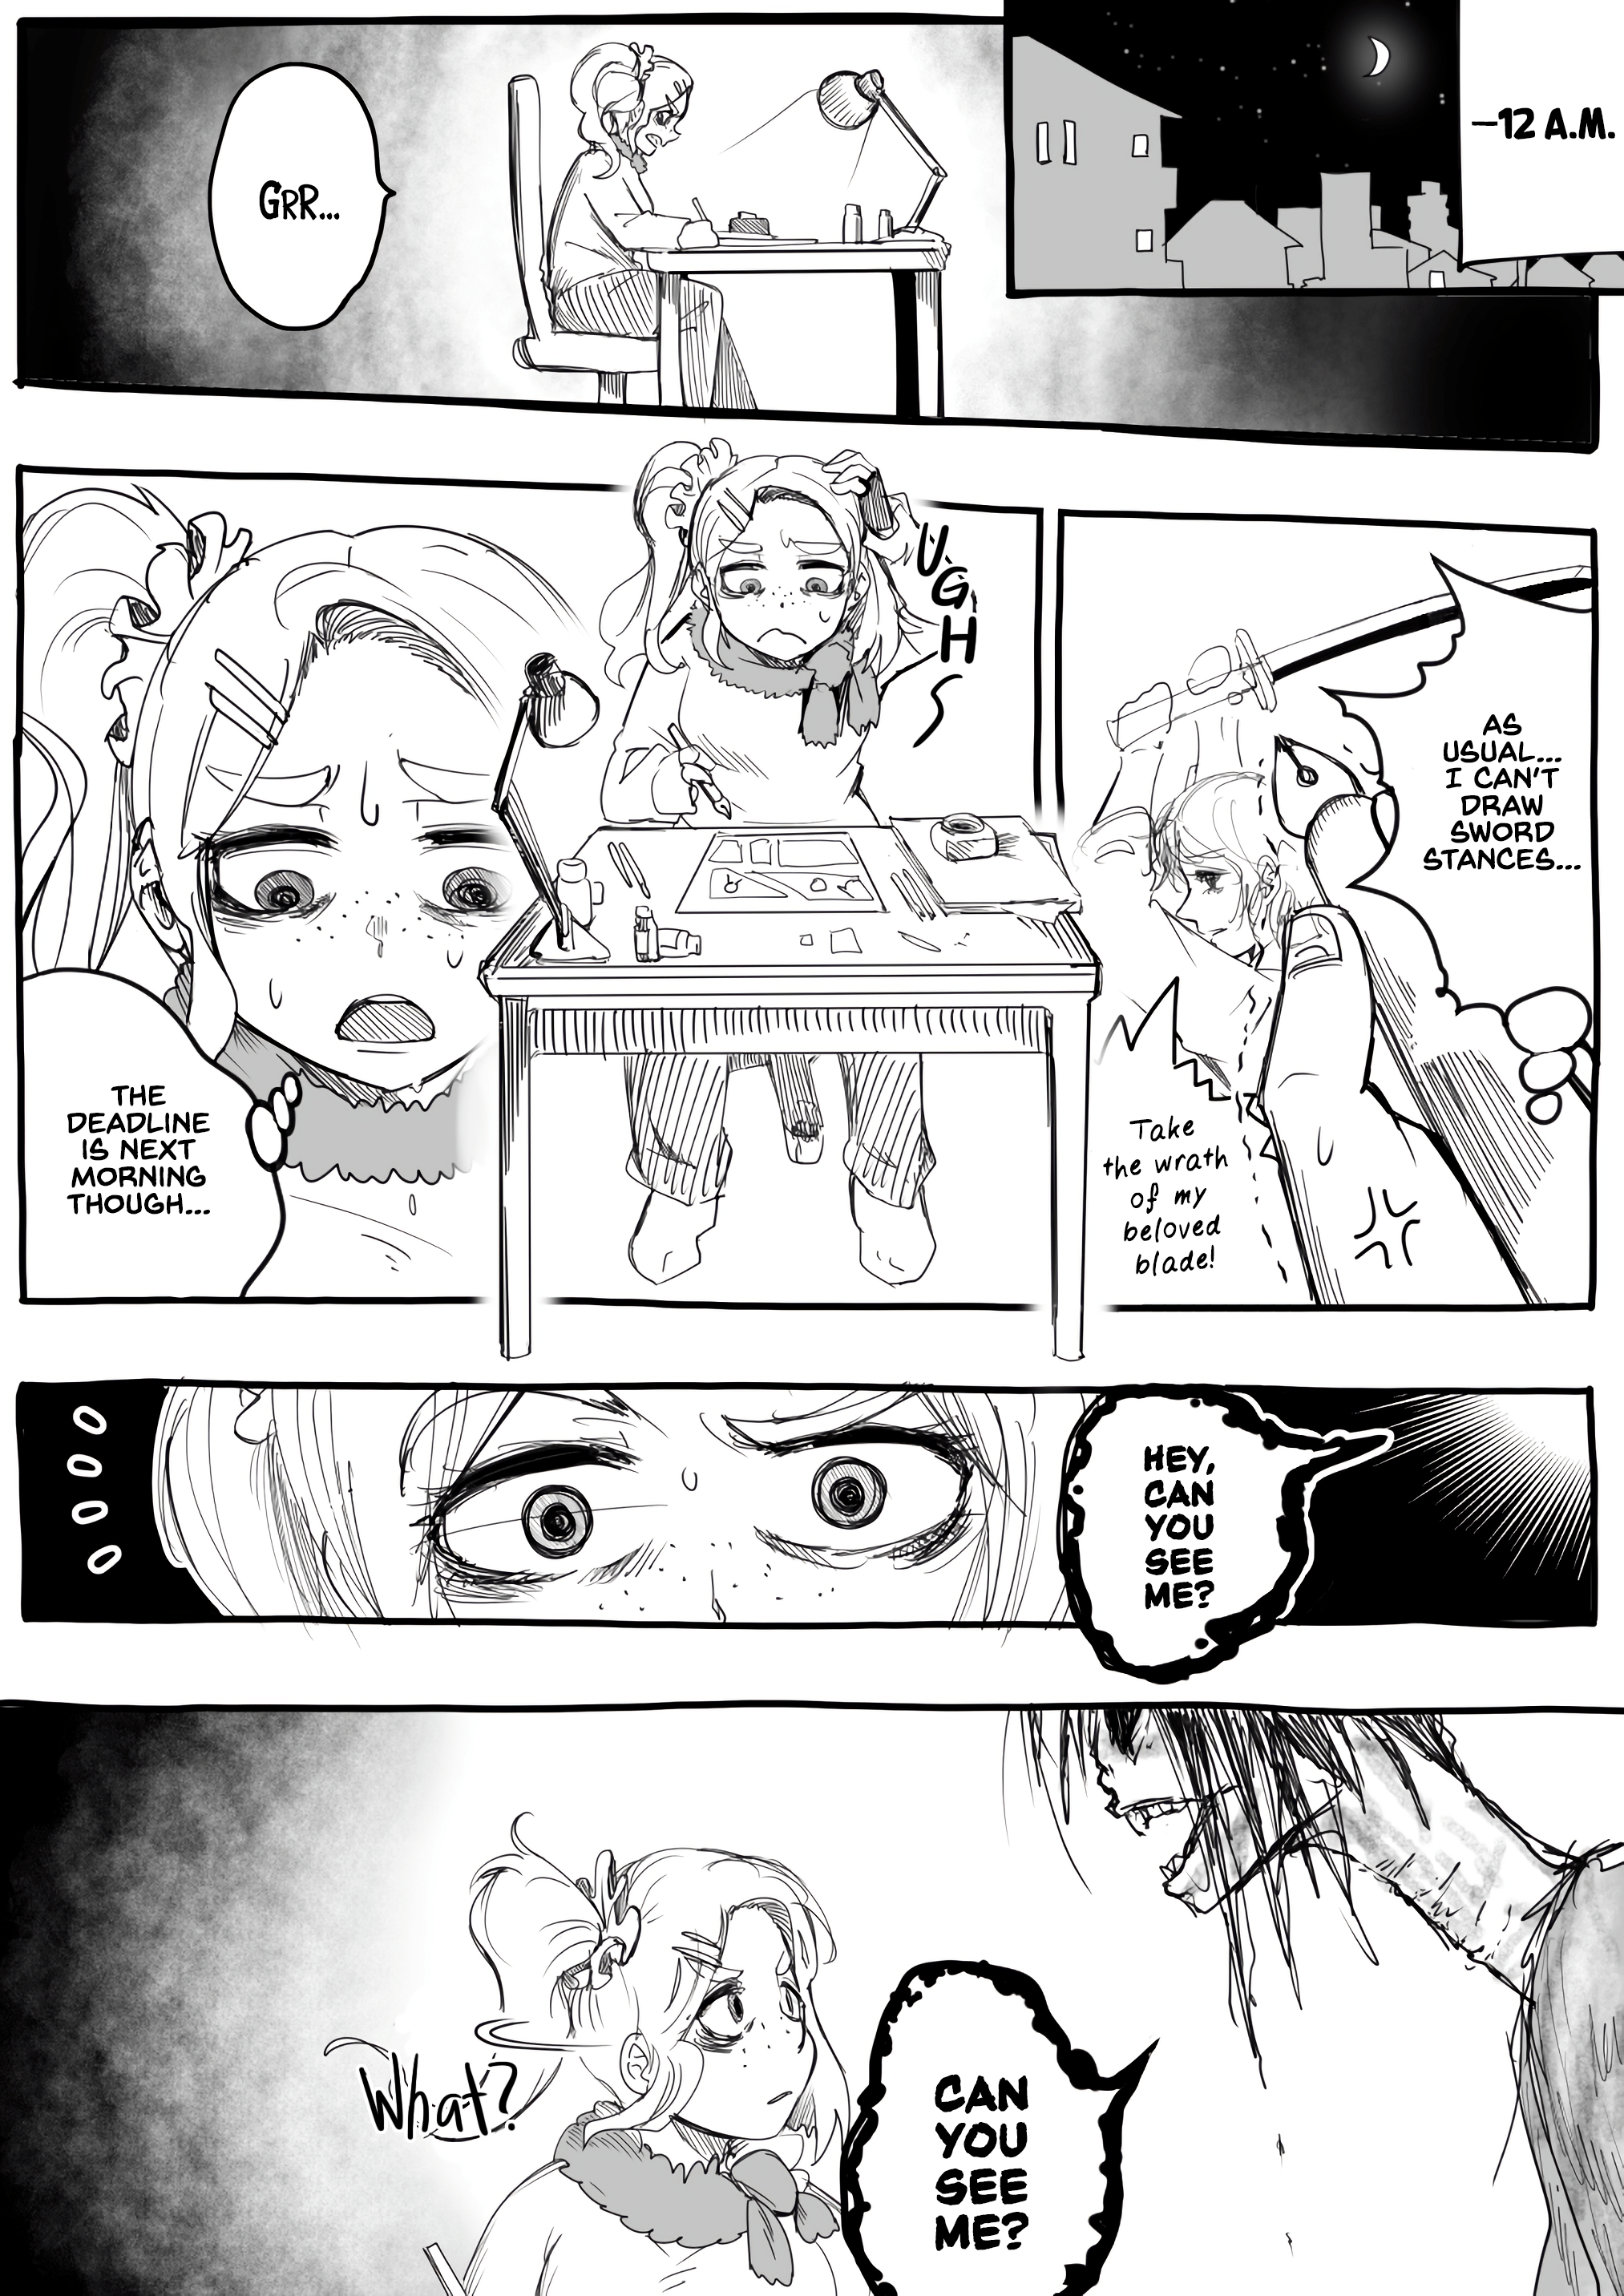 A Mangaka At The Night Before The Deadline - Page 1